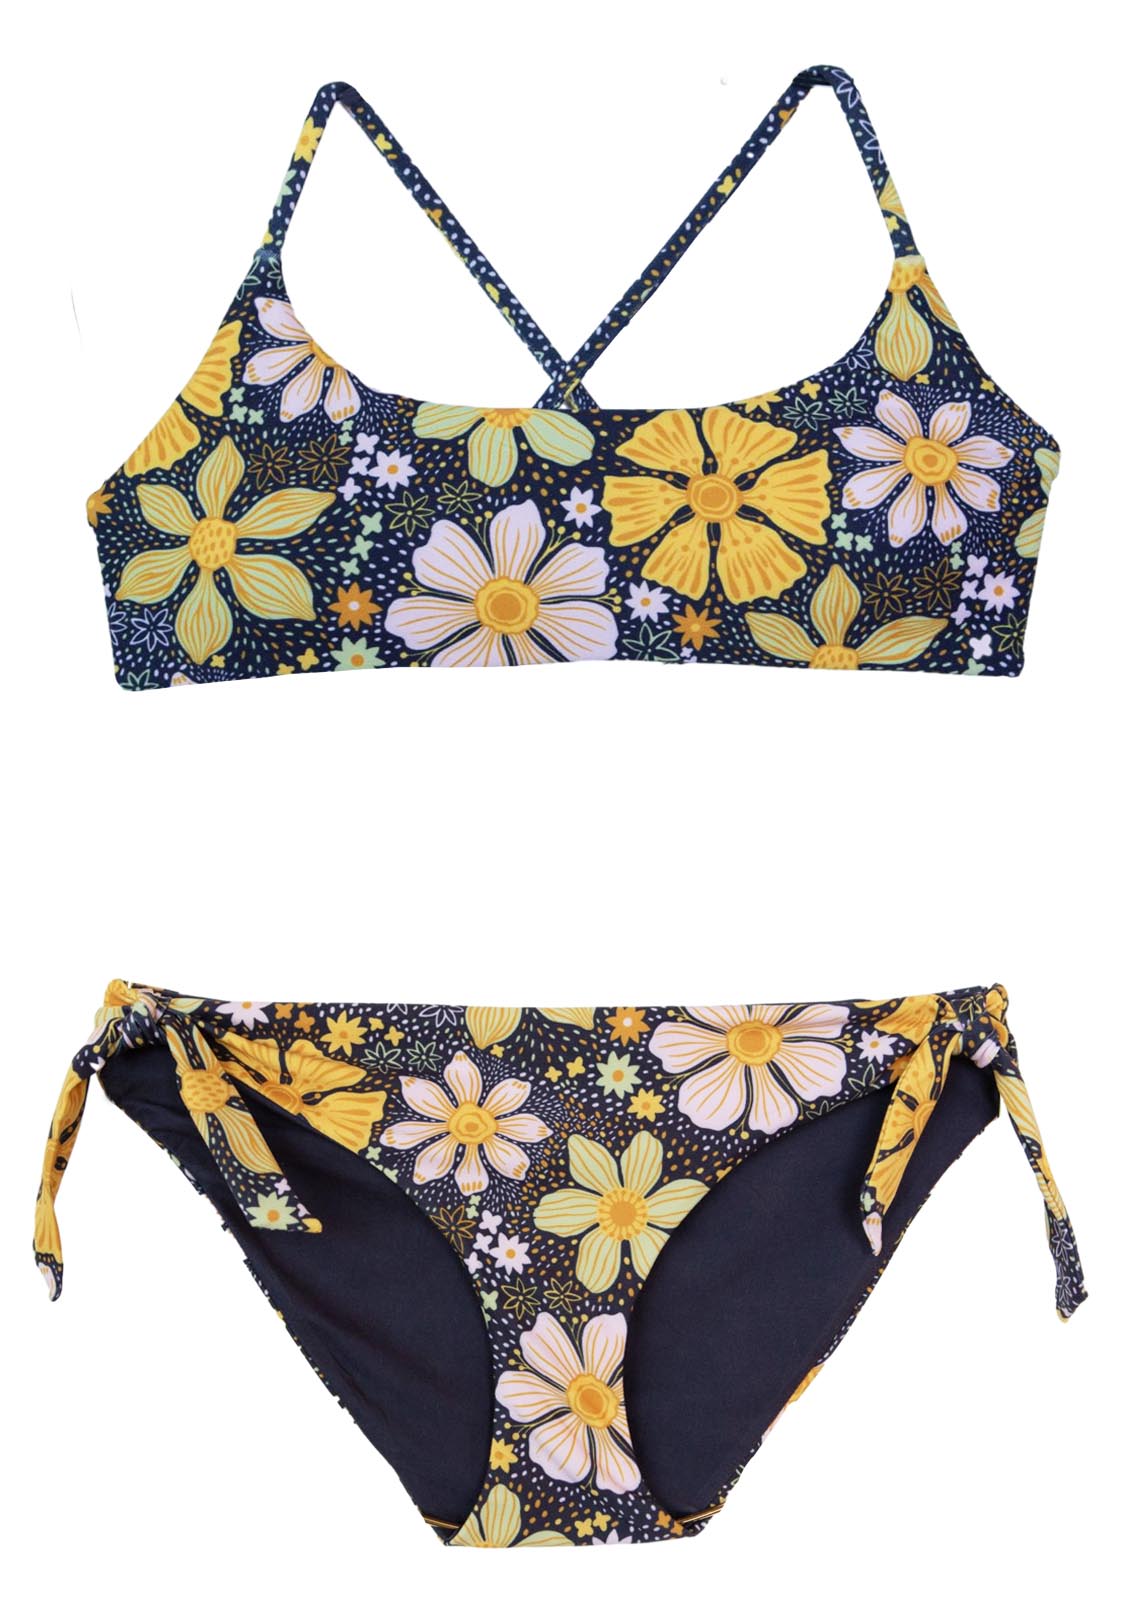 Two-piece bikini with scoop style top and matching bottoms in a boho hippie style print for Pre-teen and Junior girls